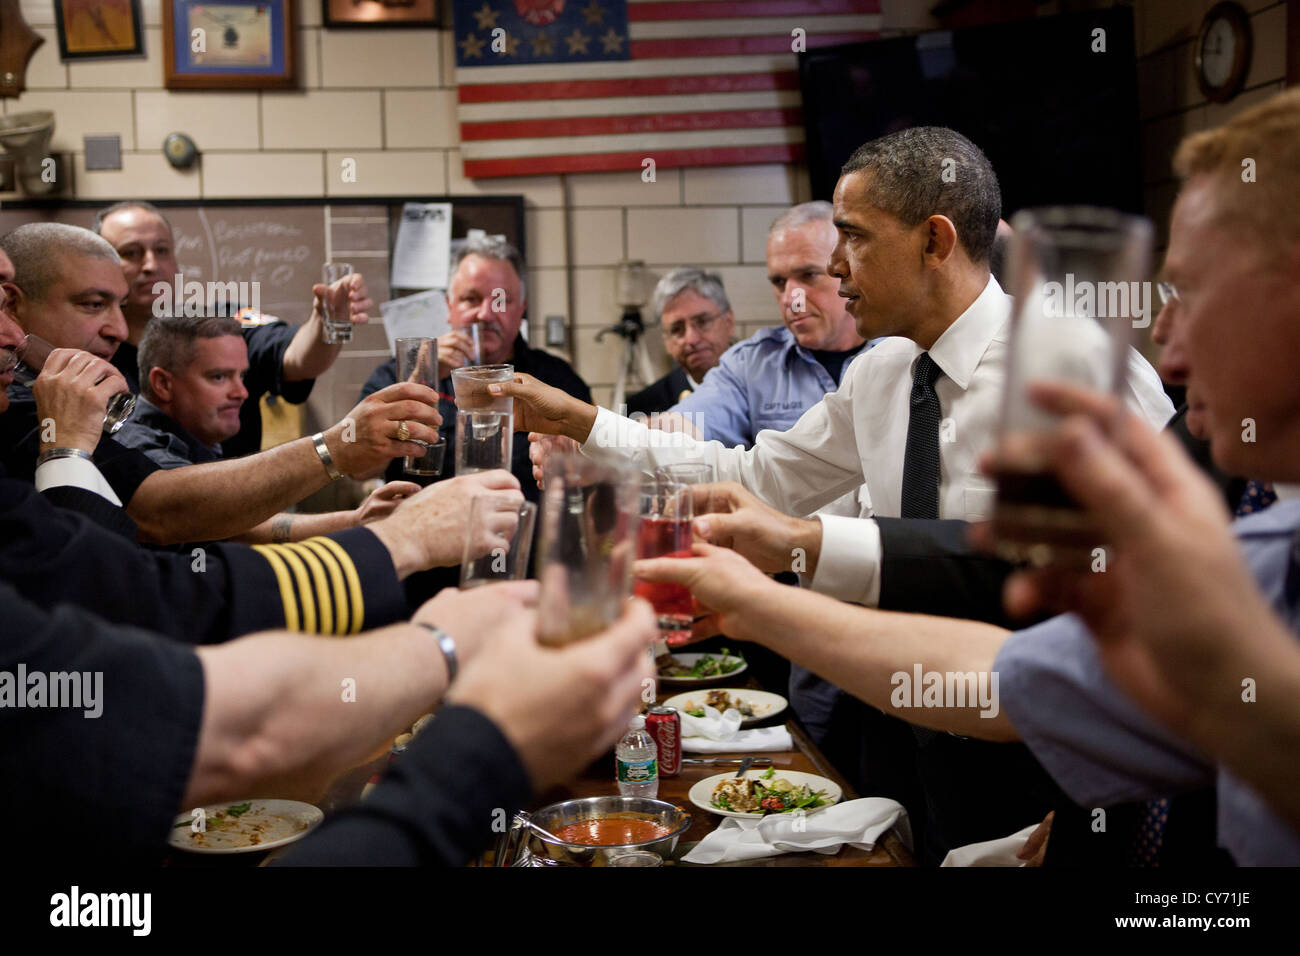 US President Barack Obama and firefighters toast during a lunch at Engine 54, Ladder 4, Battalion 9 Firehouse May 5, 2011 in New York. The firehouse, known as the Pride of Midtown, lost 15 firefighters on 9/11 an entire shift and more than any other New York firehouse. Stock Photo